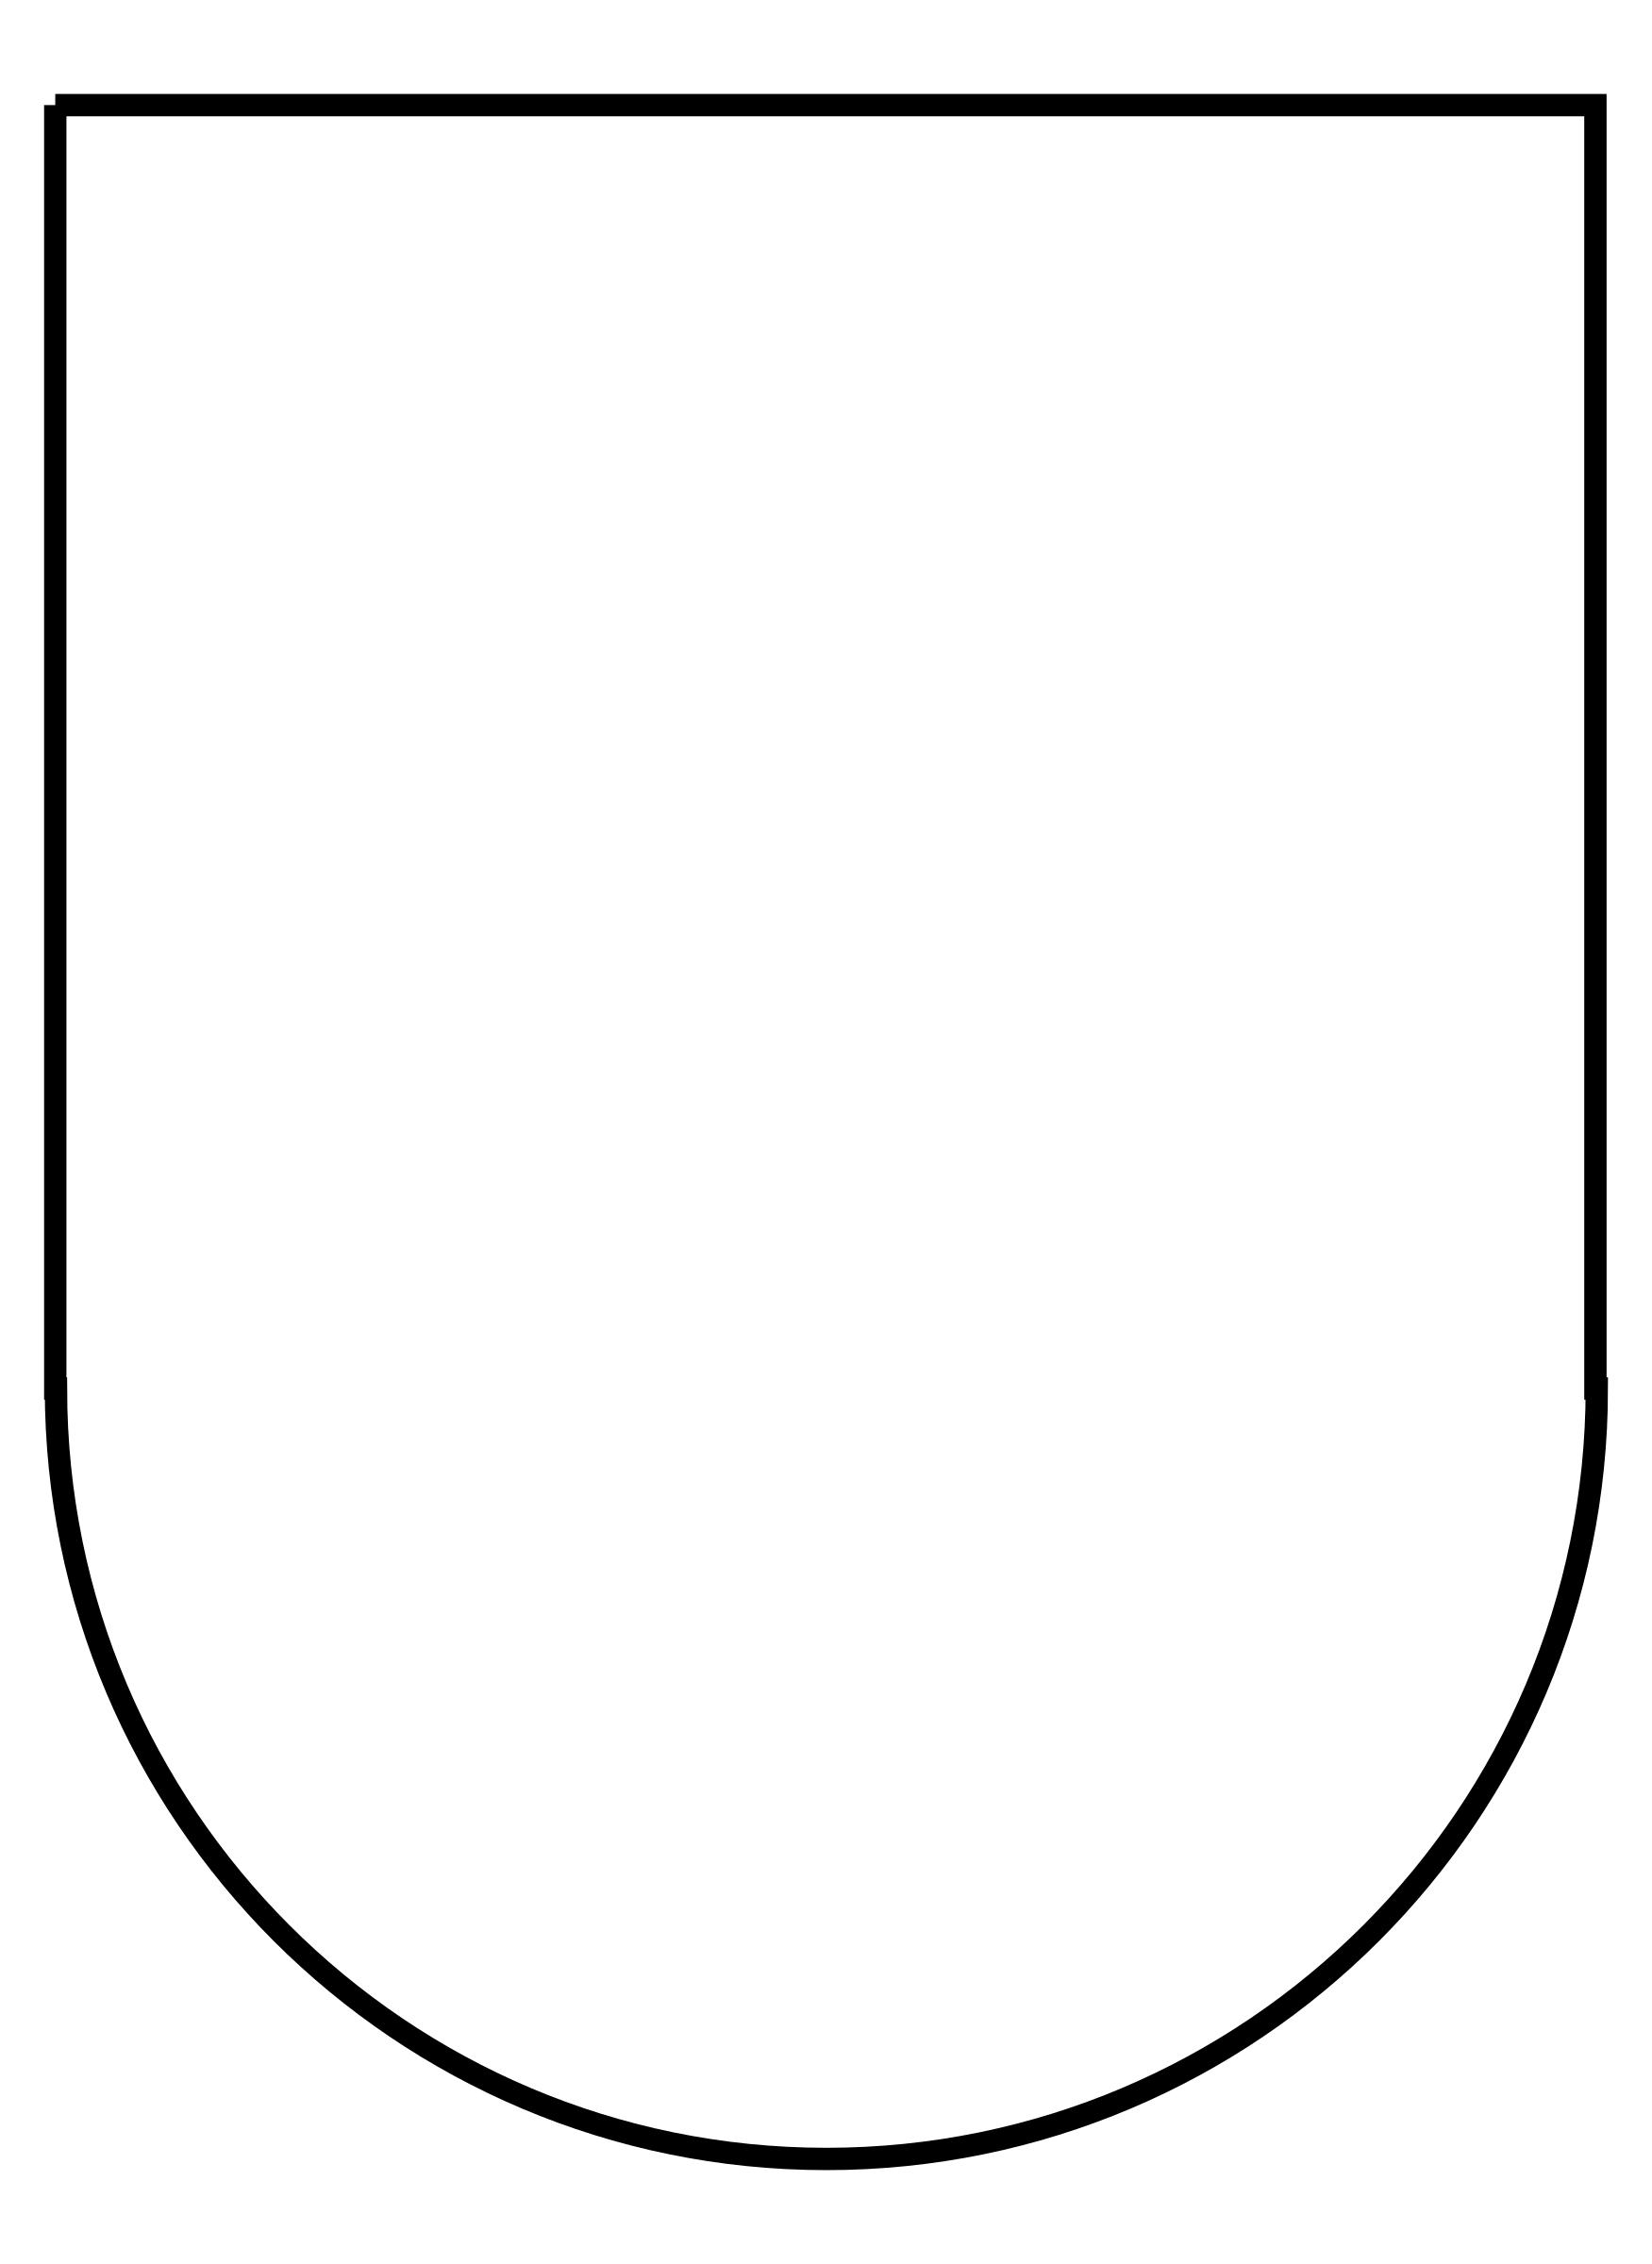 Portuguese or Spanish Shield png